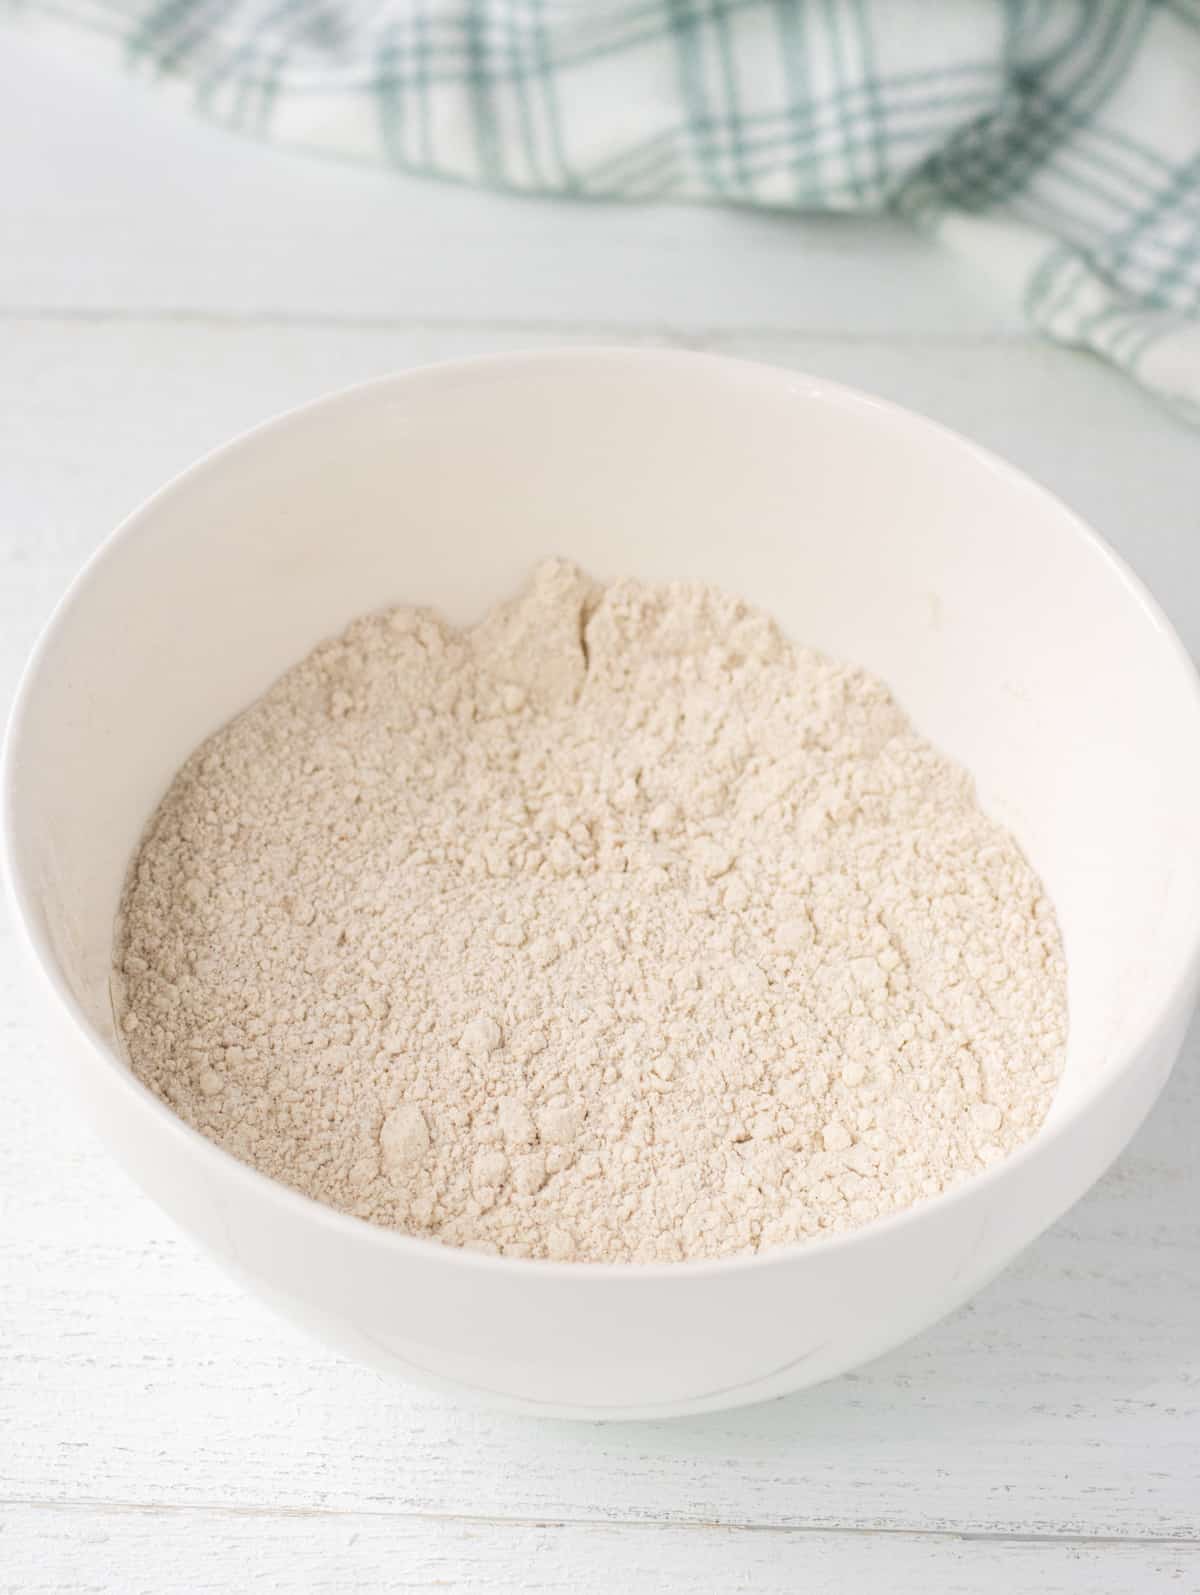 Flour, sugar, baking powder, cinnamon, cardamon, and salt whisked together in a bowl.